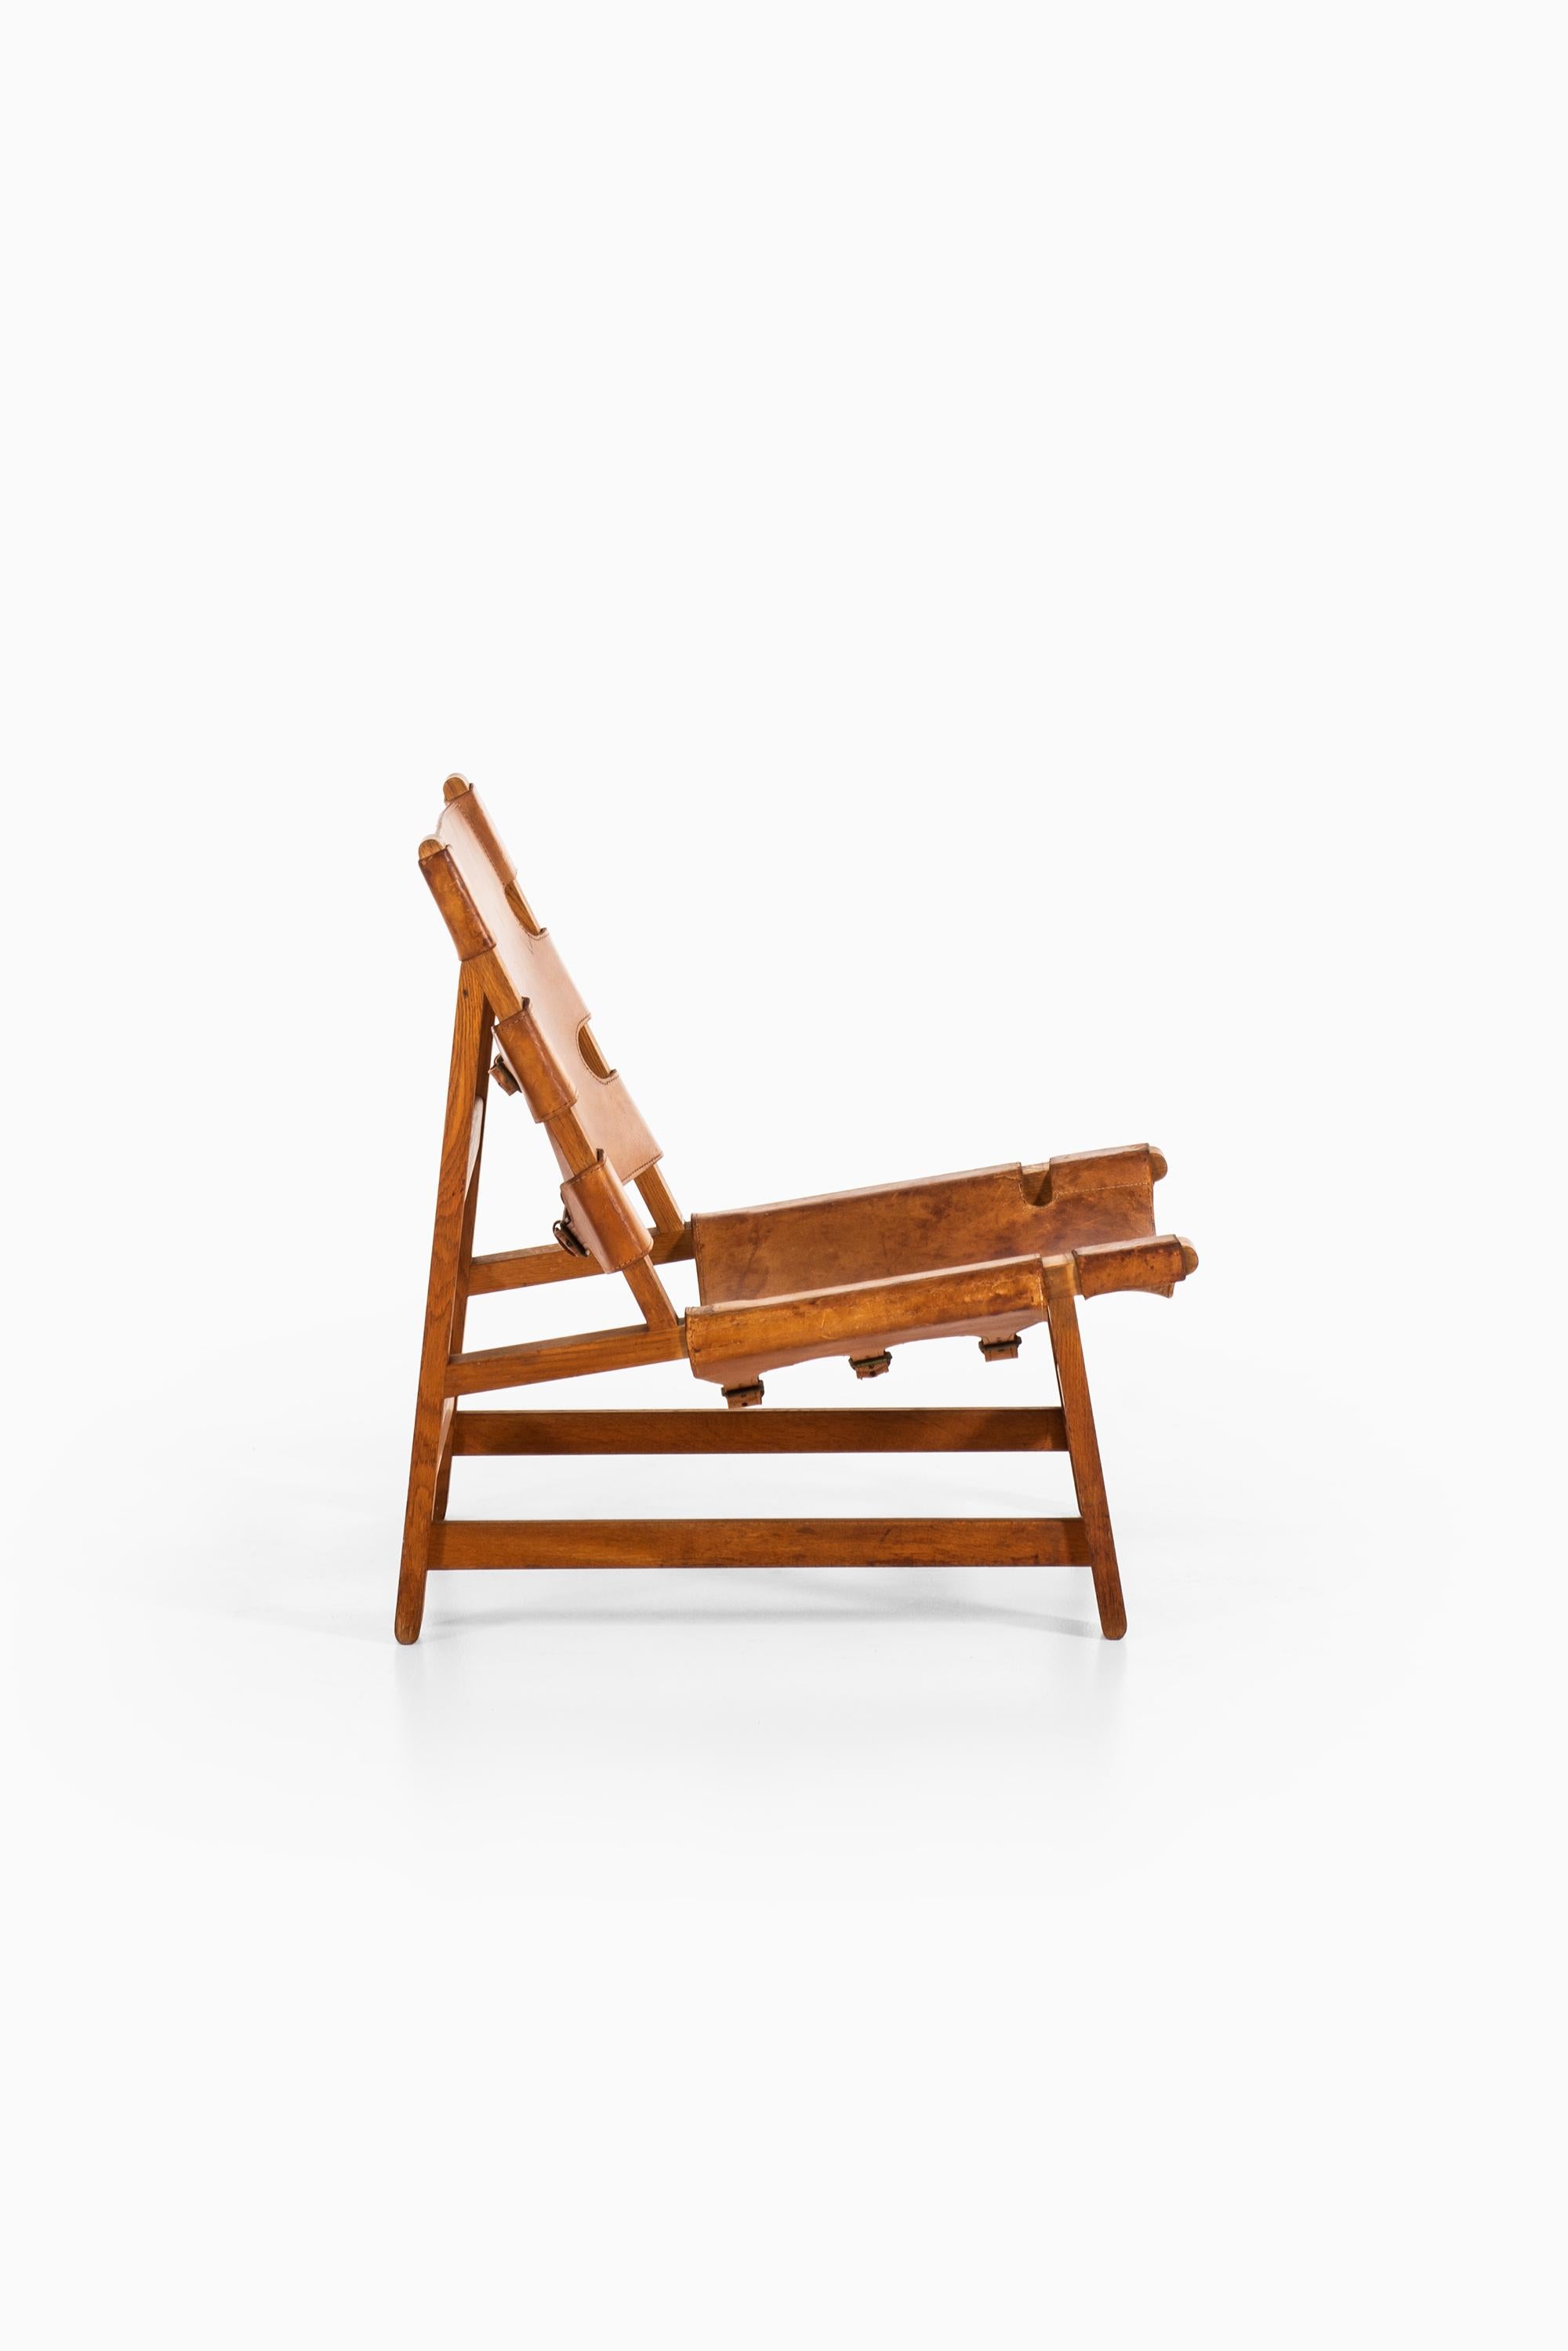 Mid-20th Century Børge Mogensen Hunting Easy Chair Model 2224 by Fredericia Stolefabrik